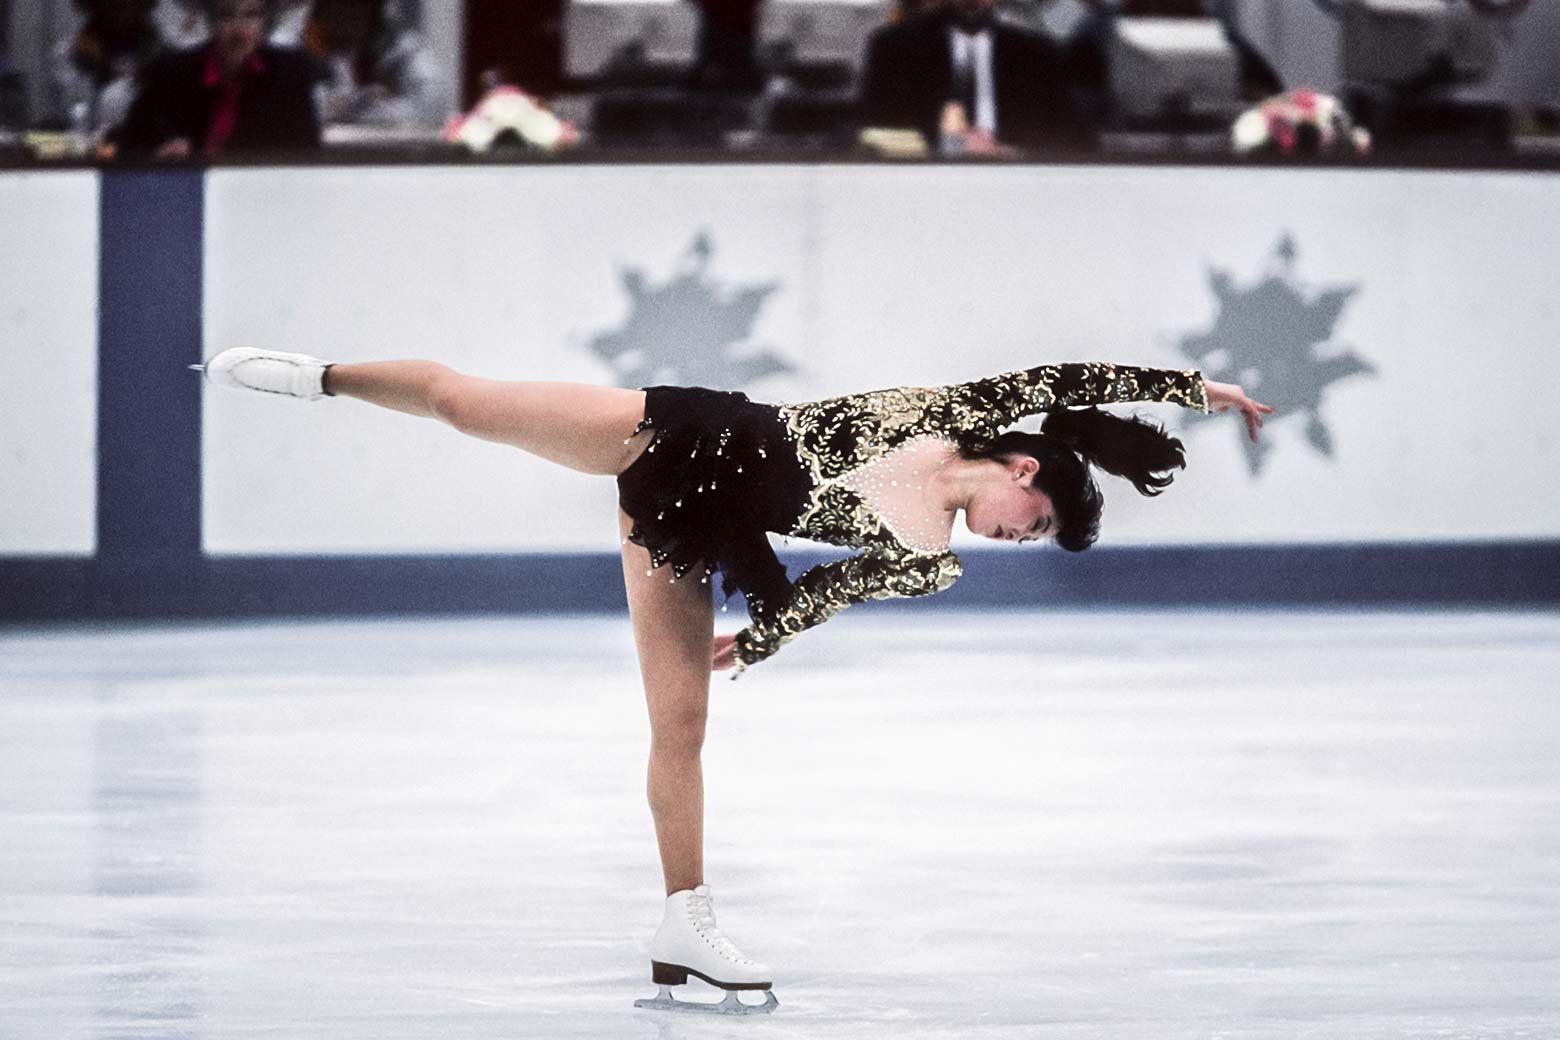 Yamaguchi skates on one leg with her arms and other leg parallel to the ground. She's wearing a black dress.